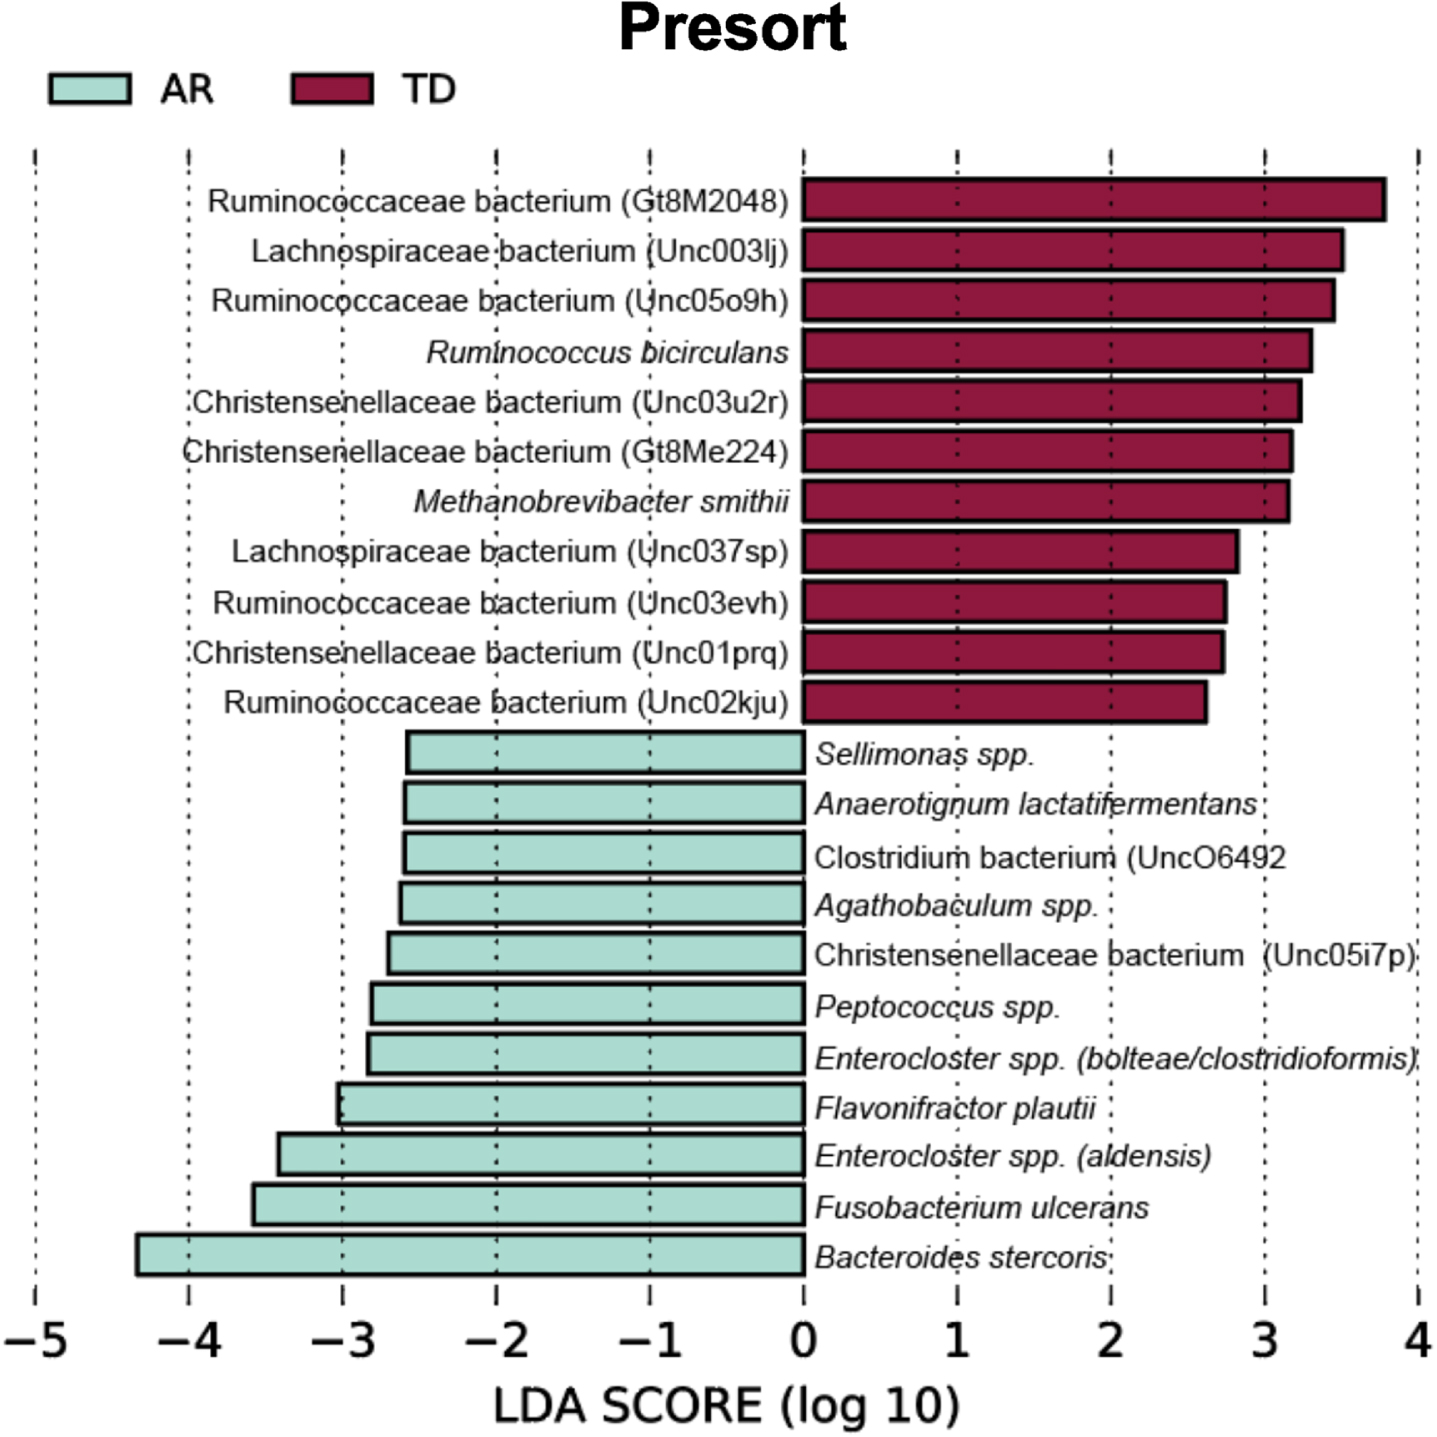 LEfSe identifies bacterial biomarkers associated with Presort samples across the Parkinson’s disease clinical subtypes. Analyses were conducted using parameters α<0.10 and linear discriminant analysis (LDA) threshold≥2.0.